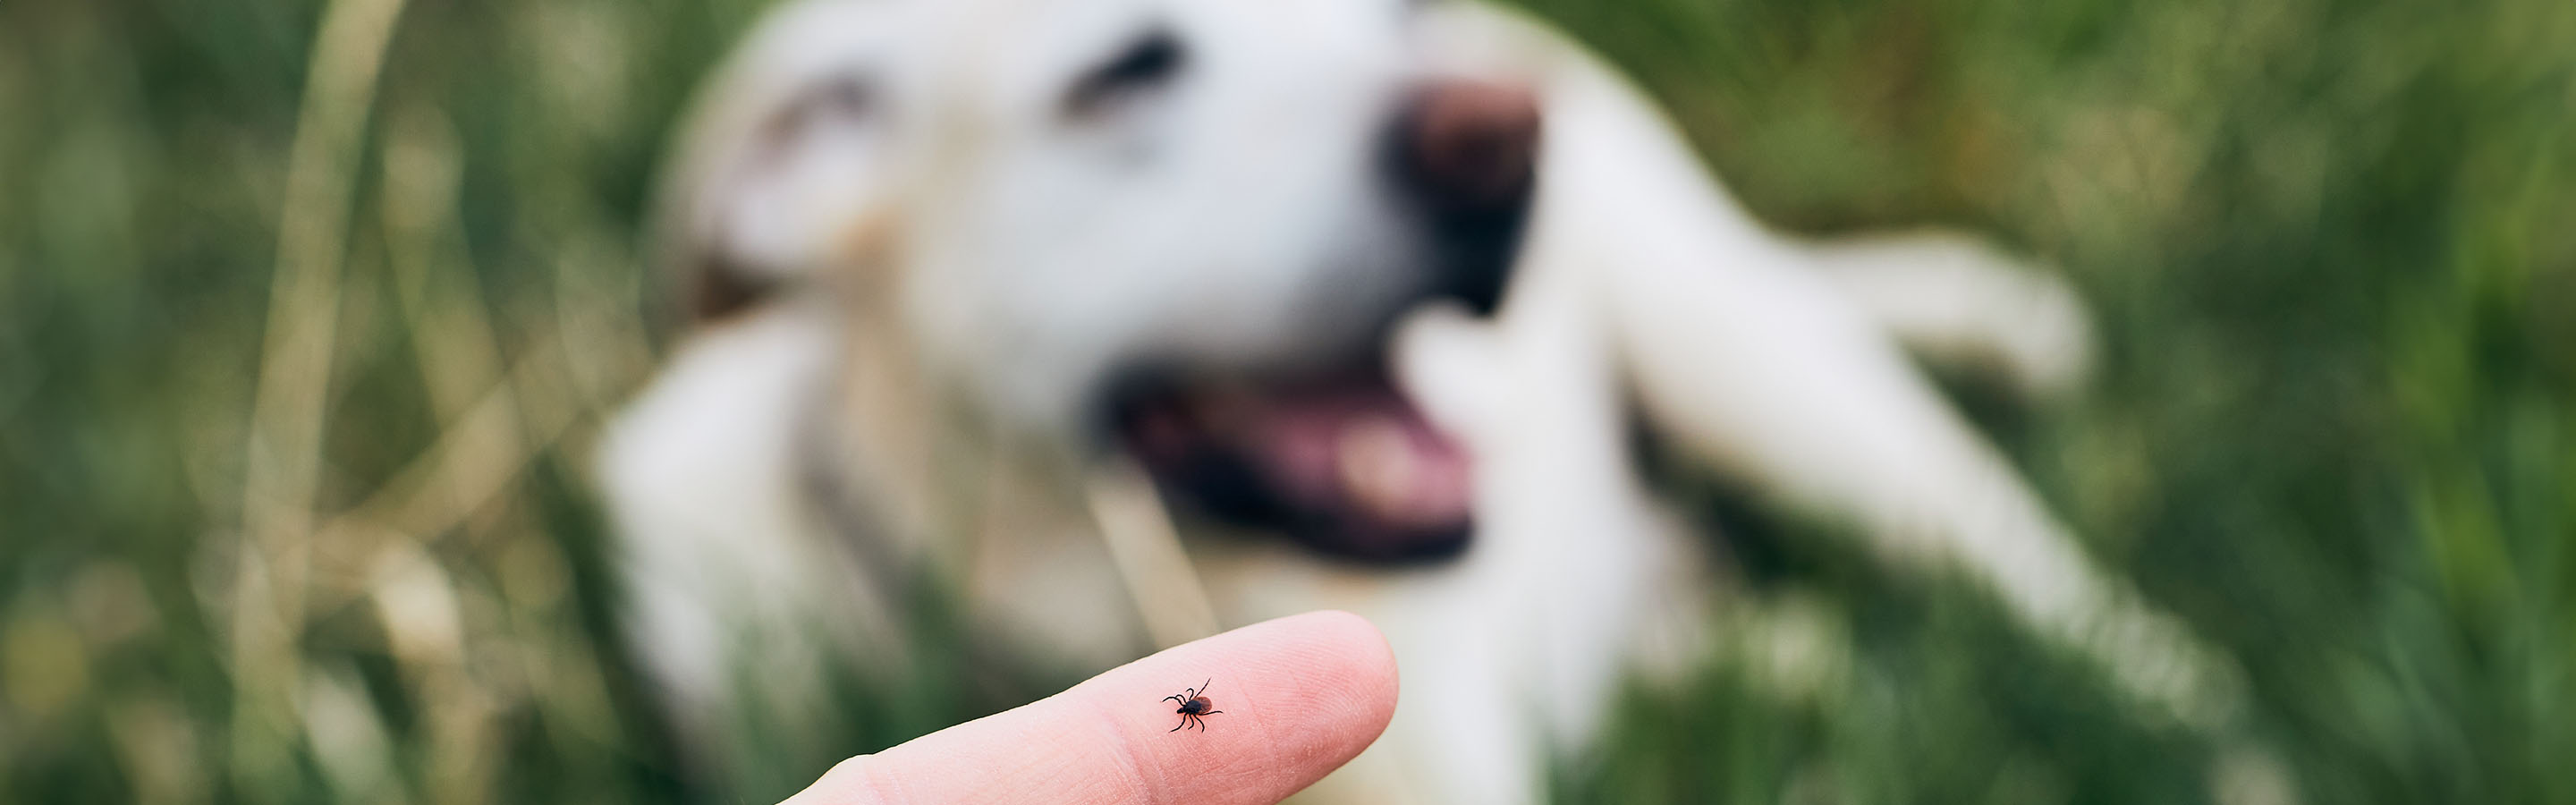 Tick on a finger with blurred white dog in background